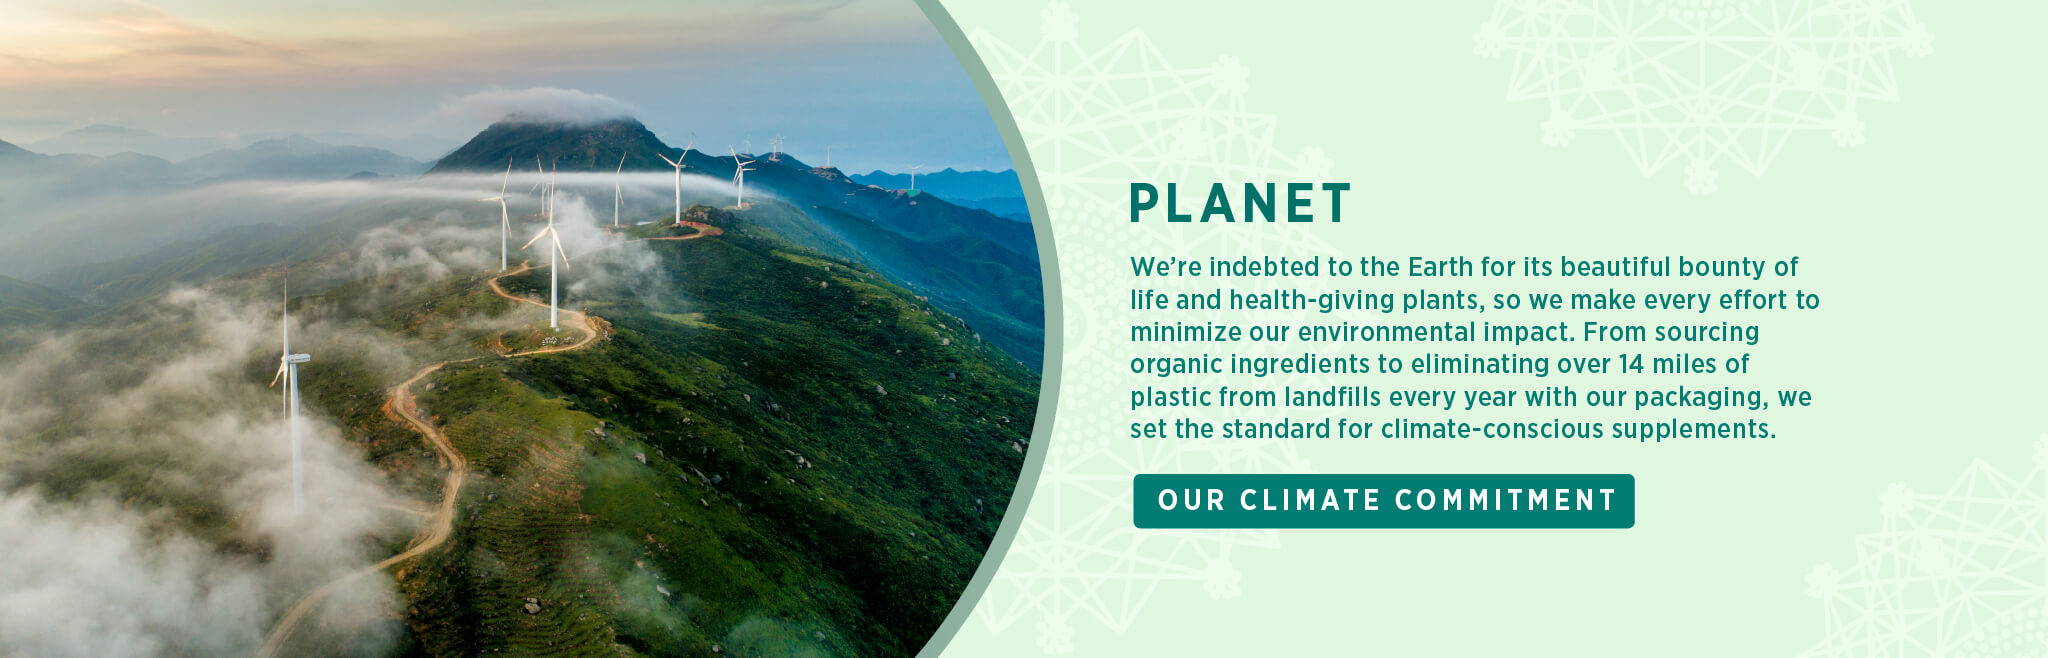 We’re indebted to the Earth for its beautiful bounty of life and health-giving plants, so we make every effort to minimize our environmental impact. From sourcing organic ingredients to eliminating over 14 miles of plastic from landfills every year with our packaging, we set the standard for climate-conscious supplements. 